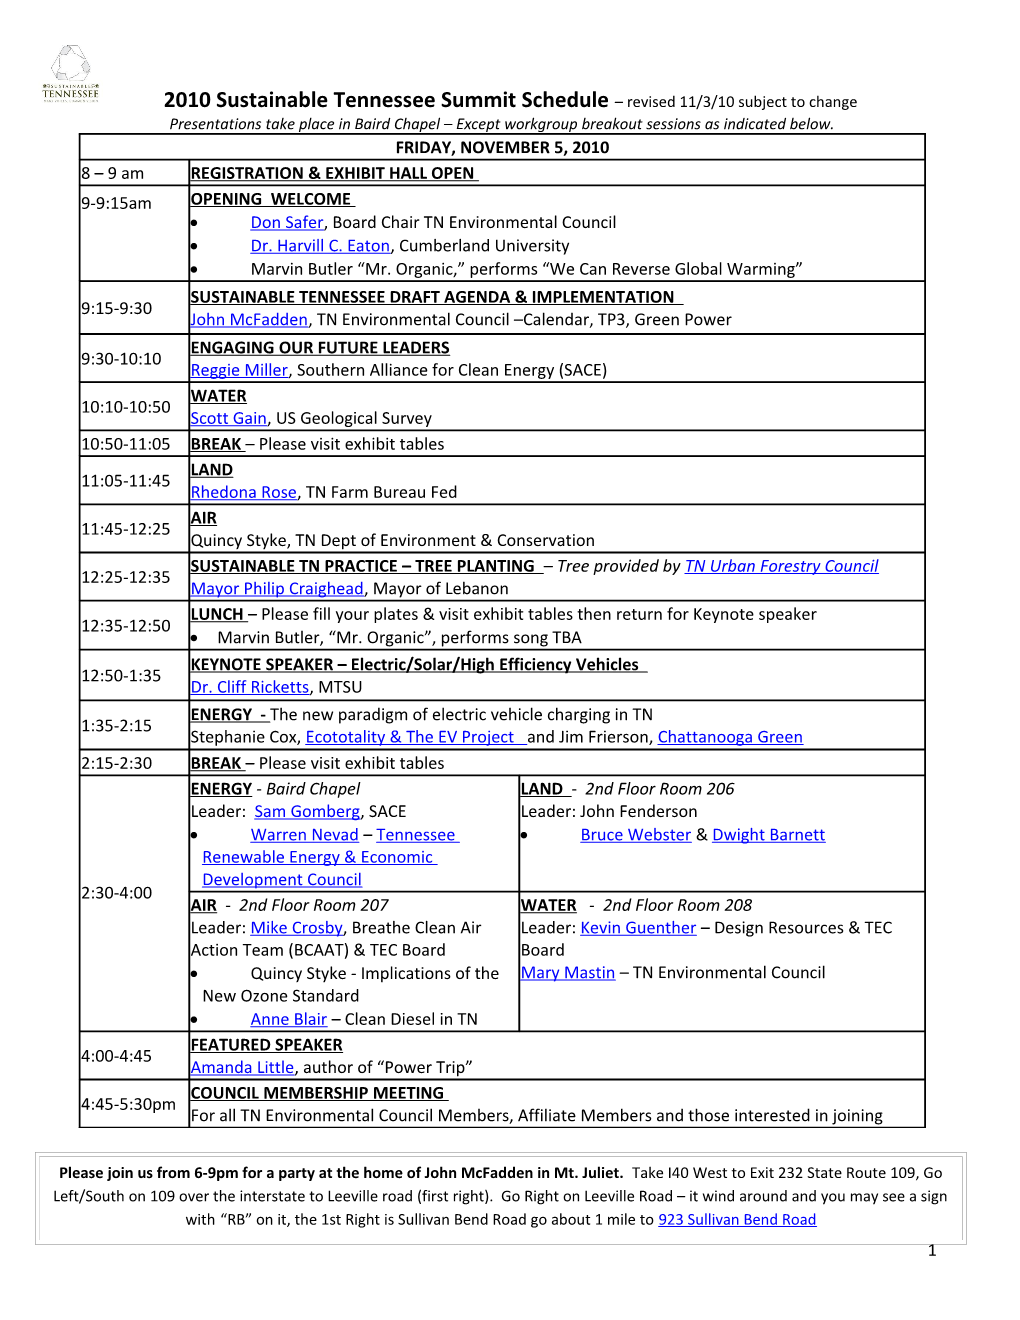 2008 Summit for a Sustainable Tennessee Itinerary